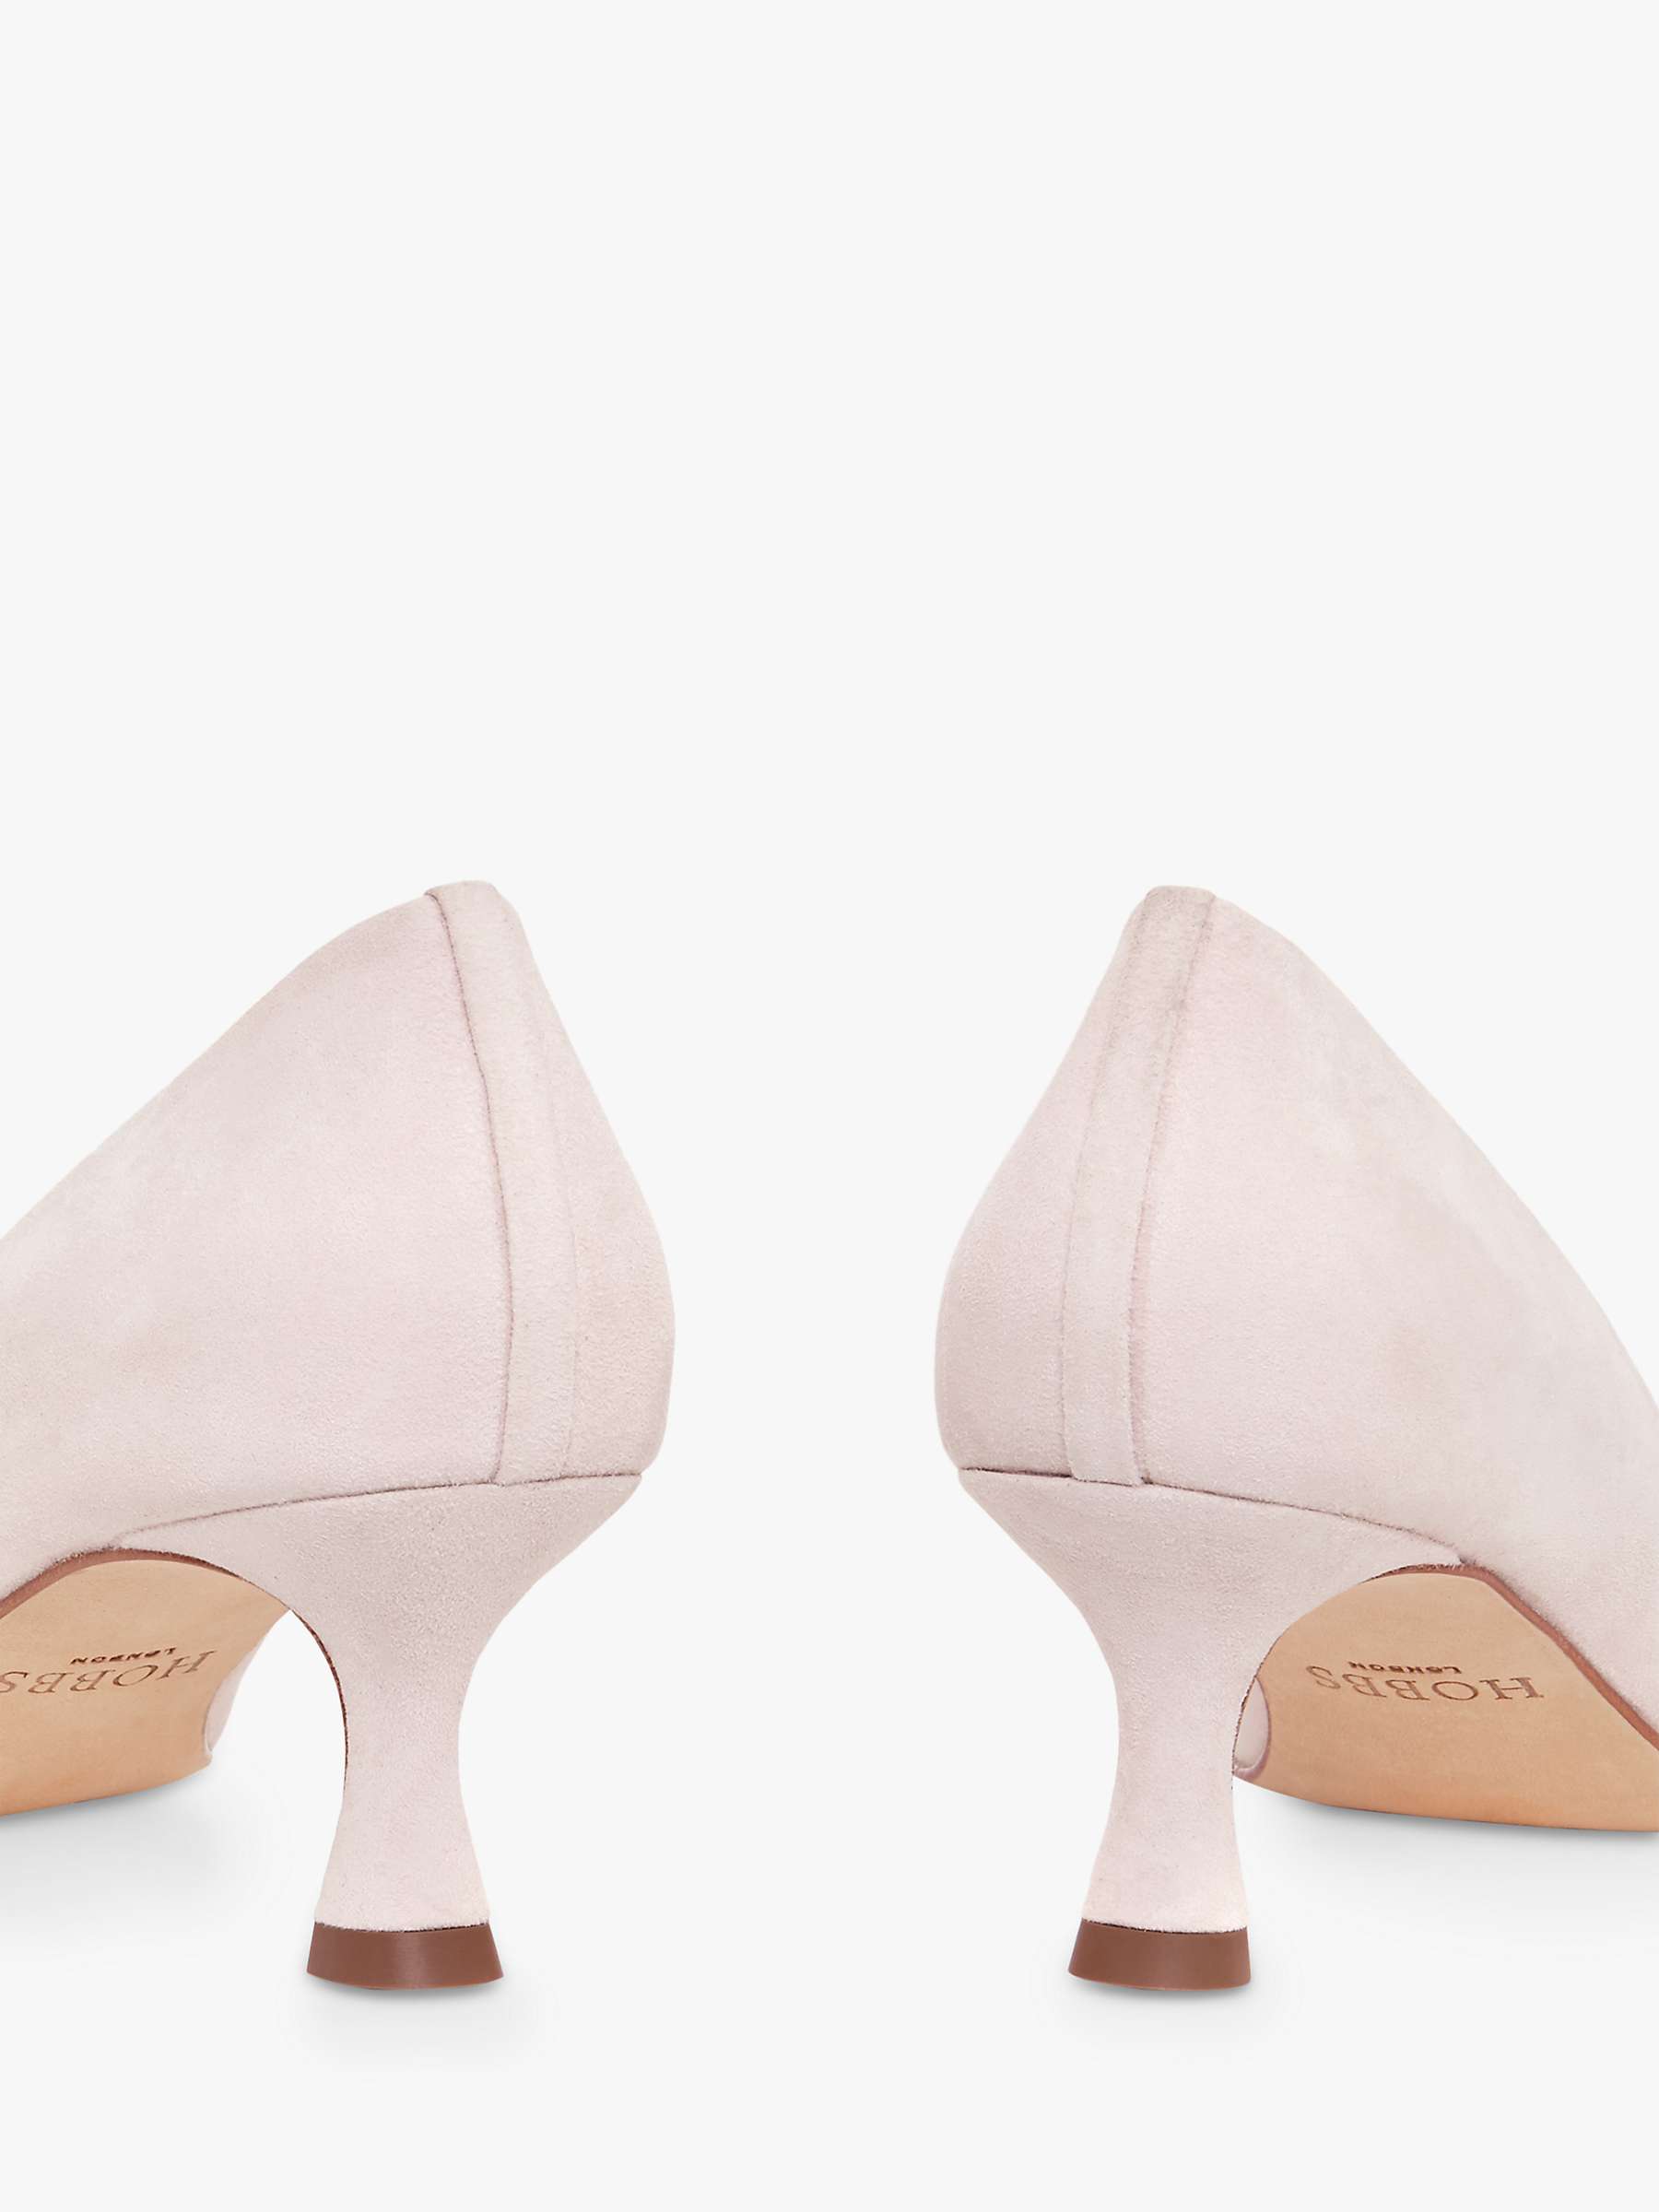 Buy Hobbs Esther Suede Court Shoes Online at johnlewis.com